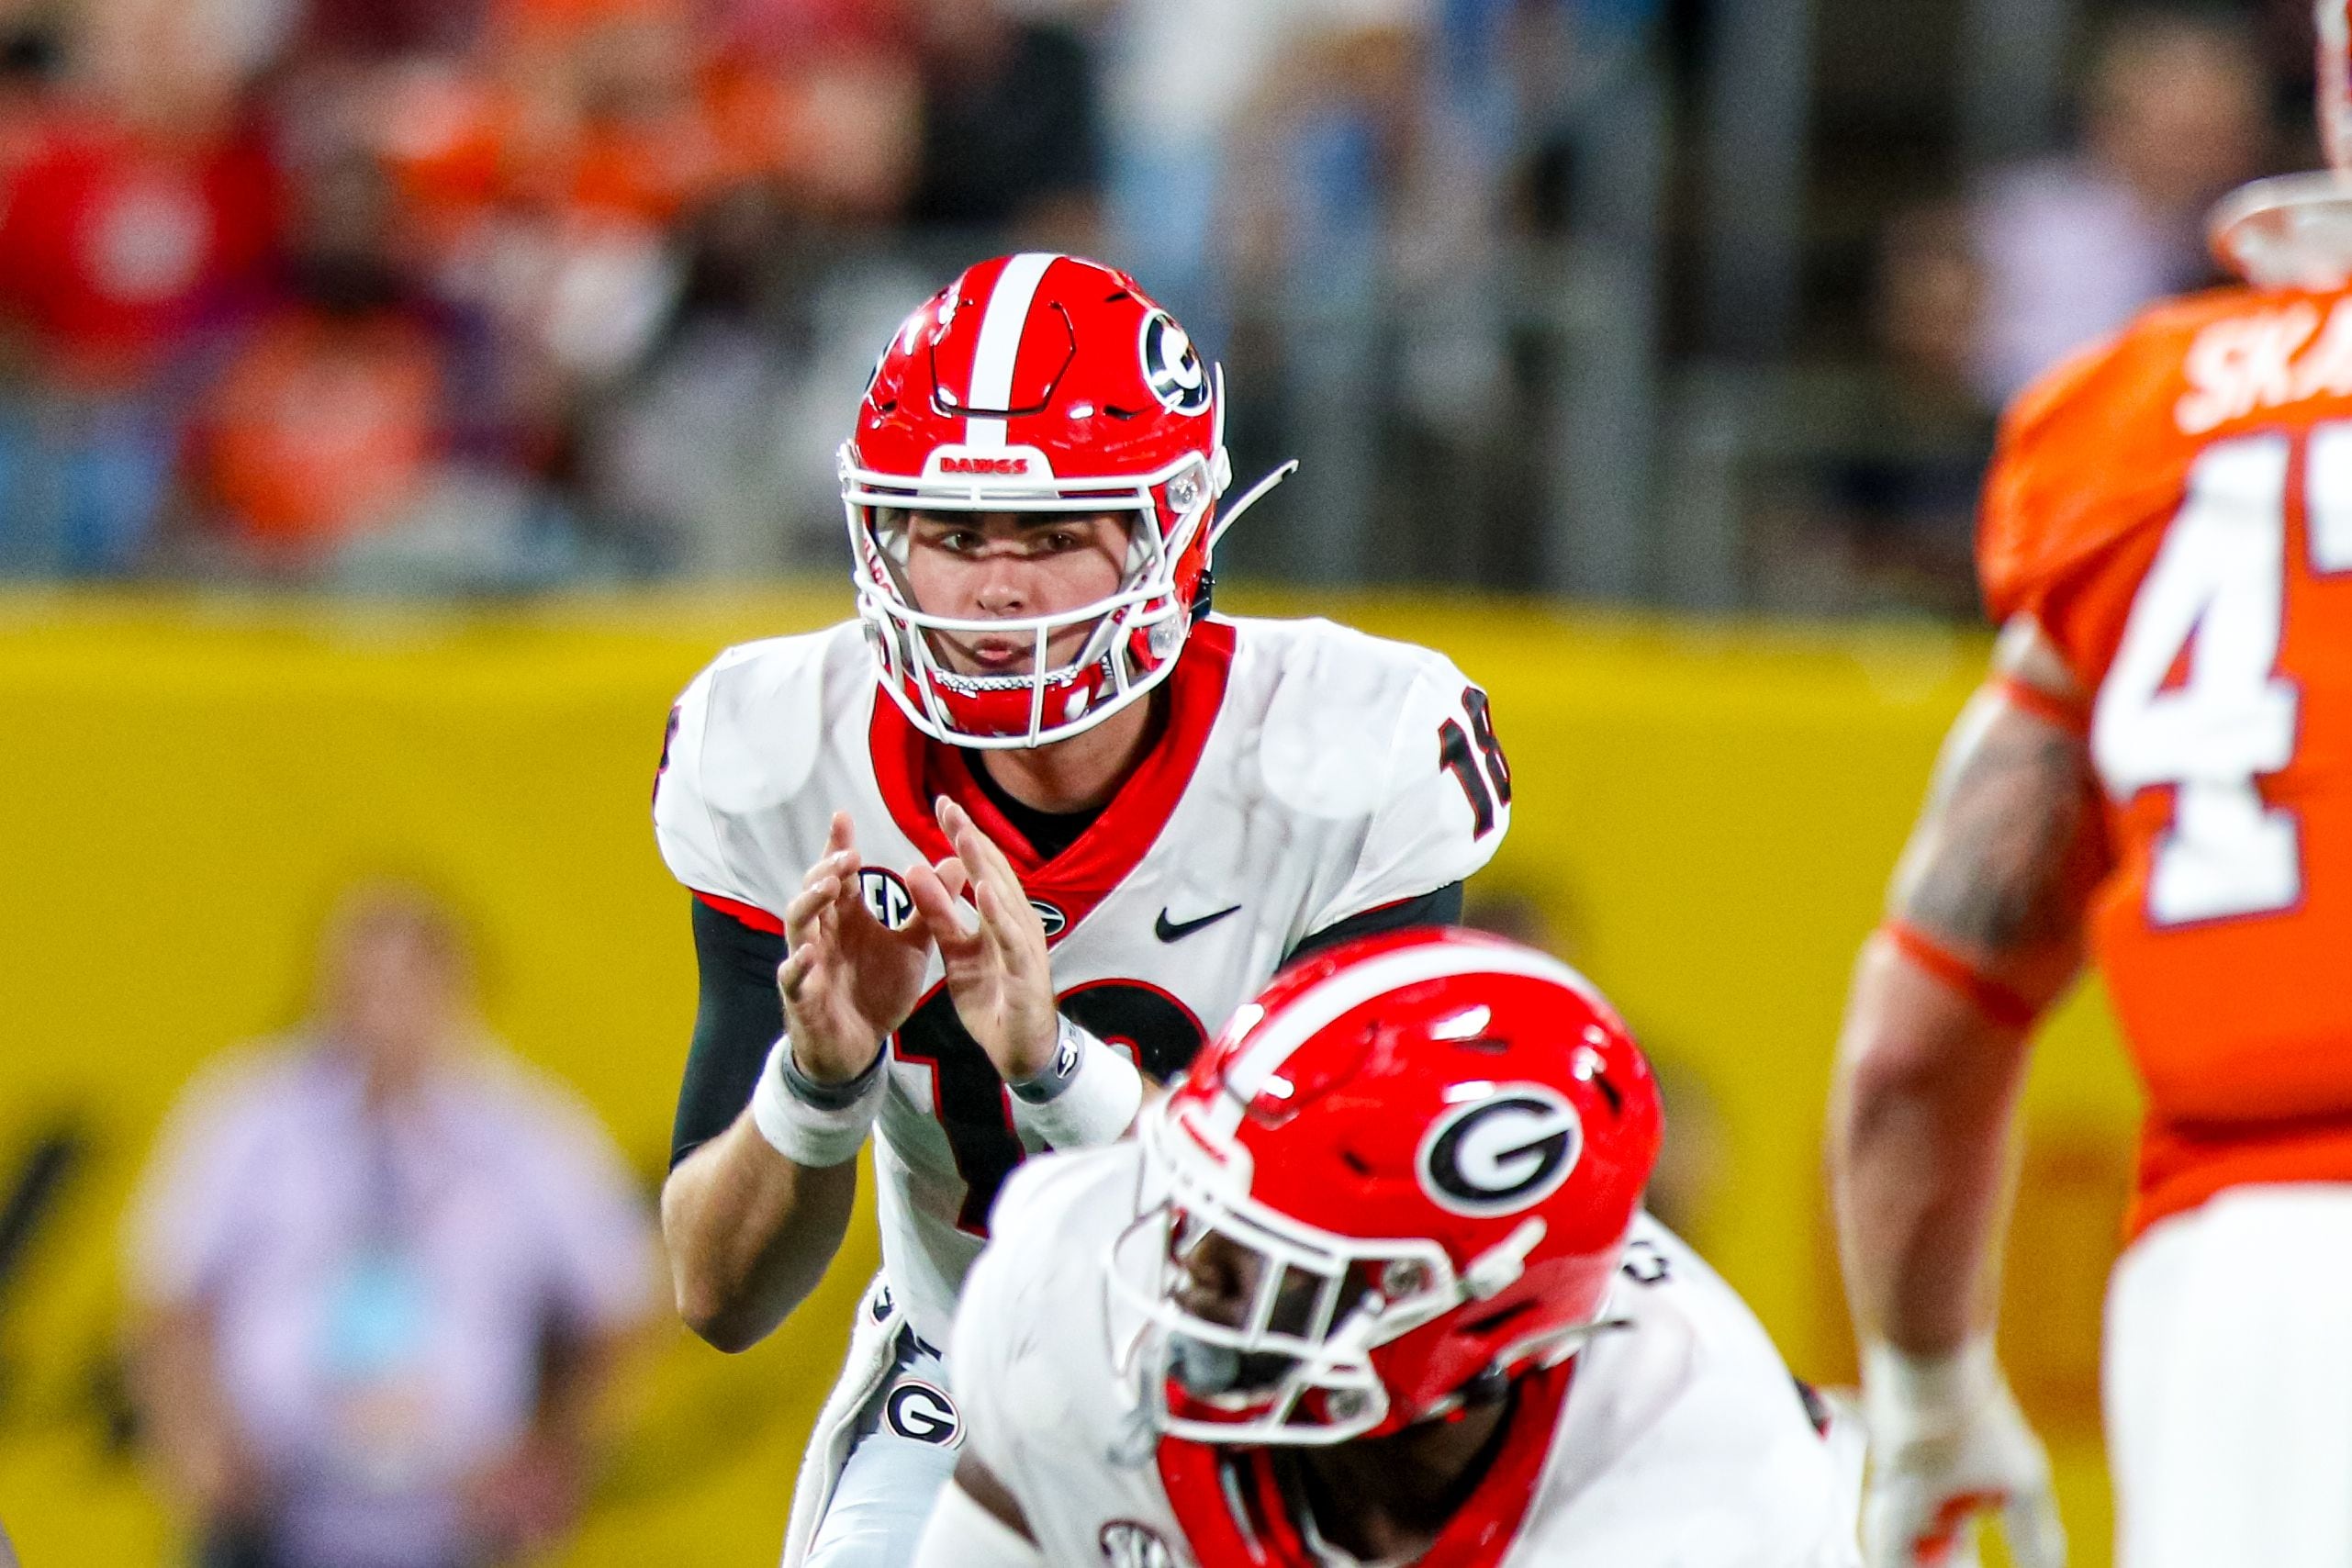 Georgia Football-uab Game Time Tv Channel How To Watch Online Odds For Week 2 Game Sept 11 2021